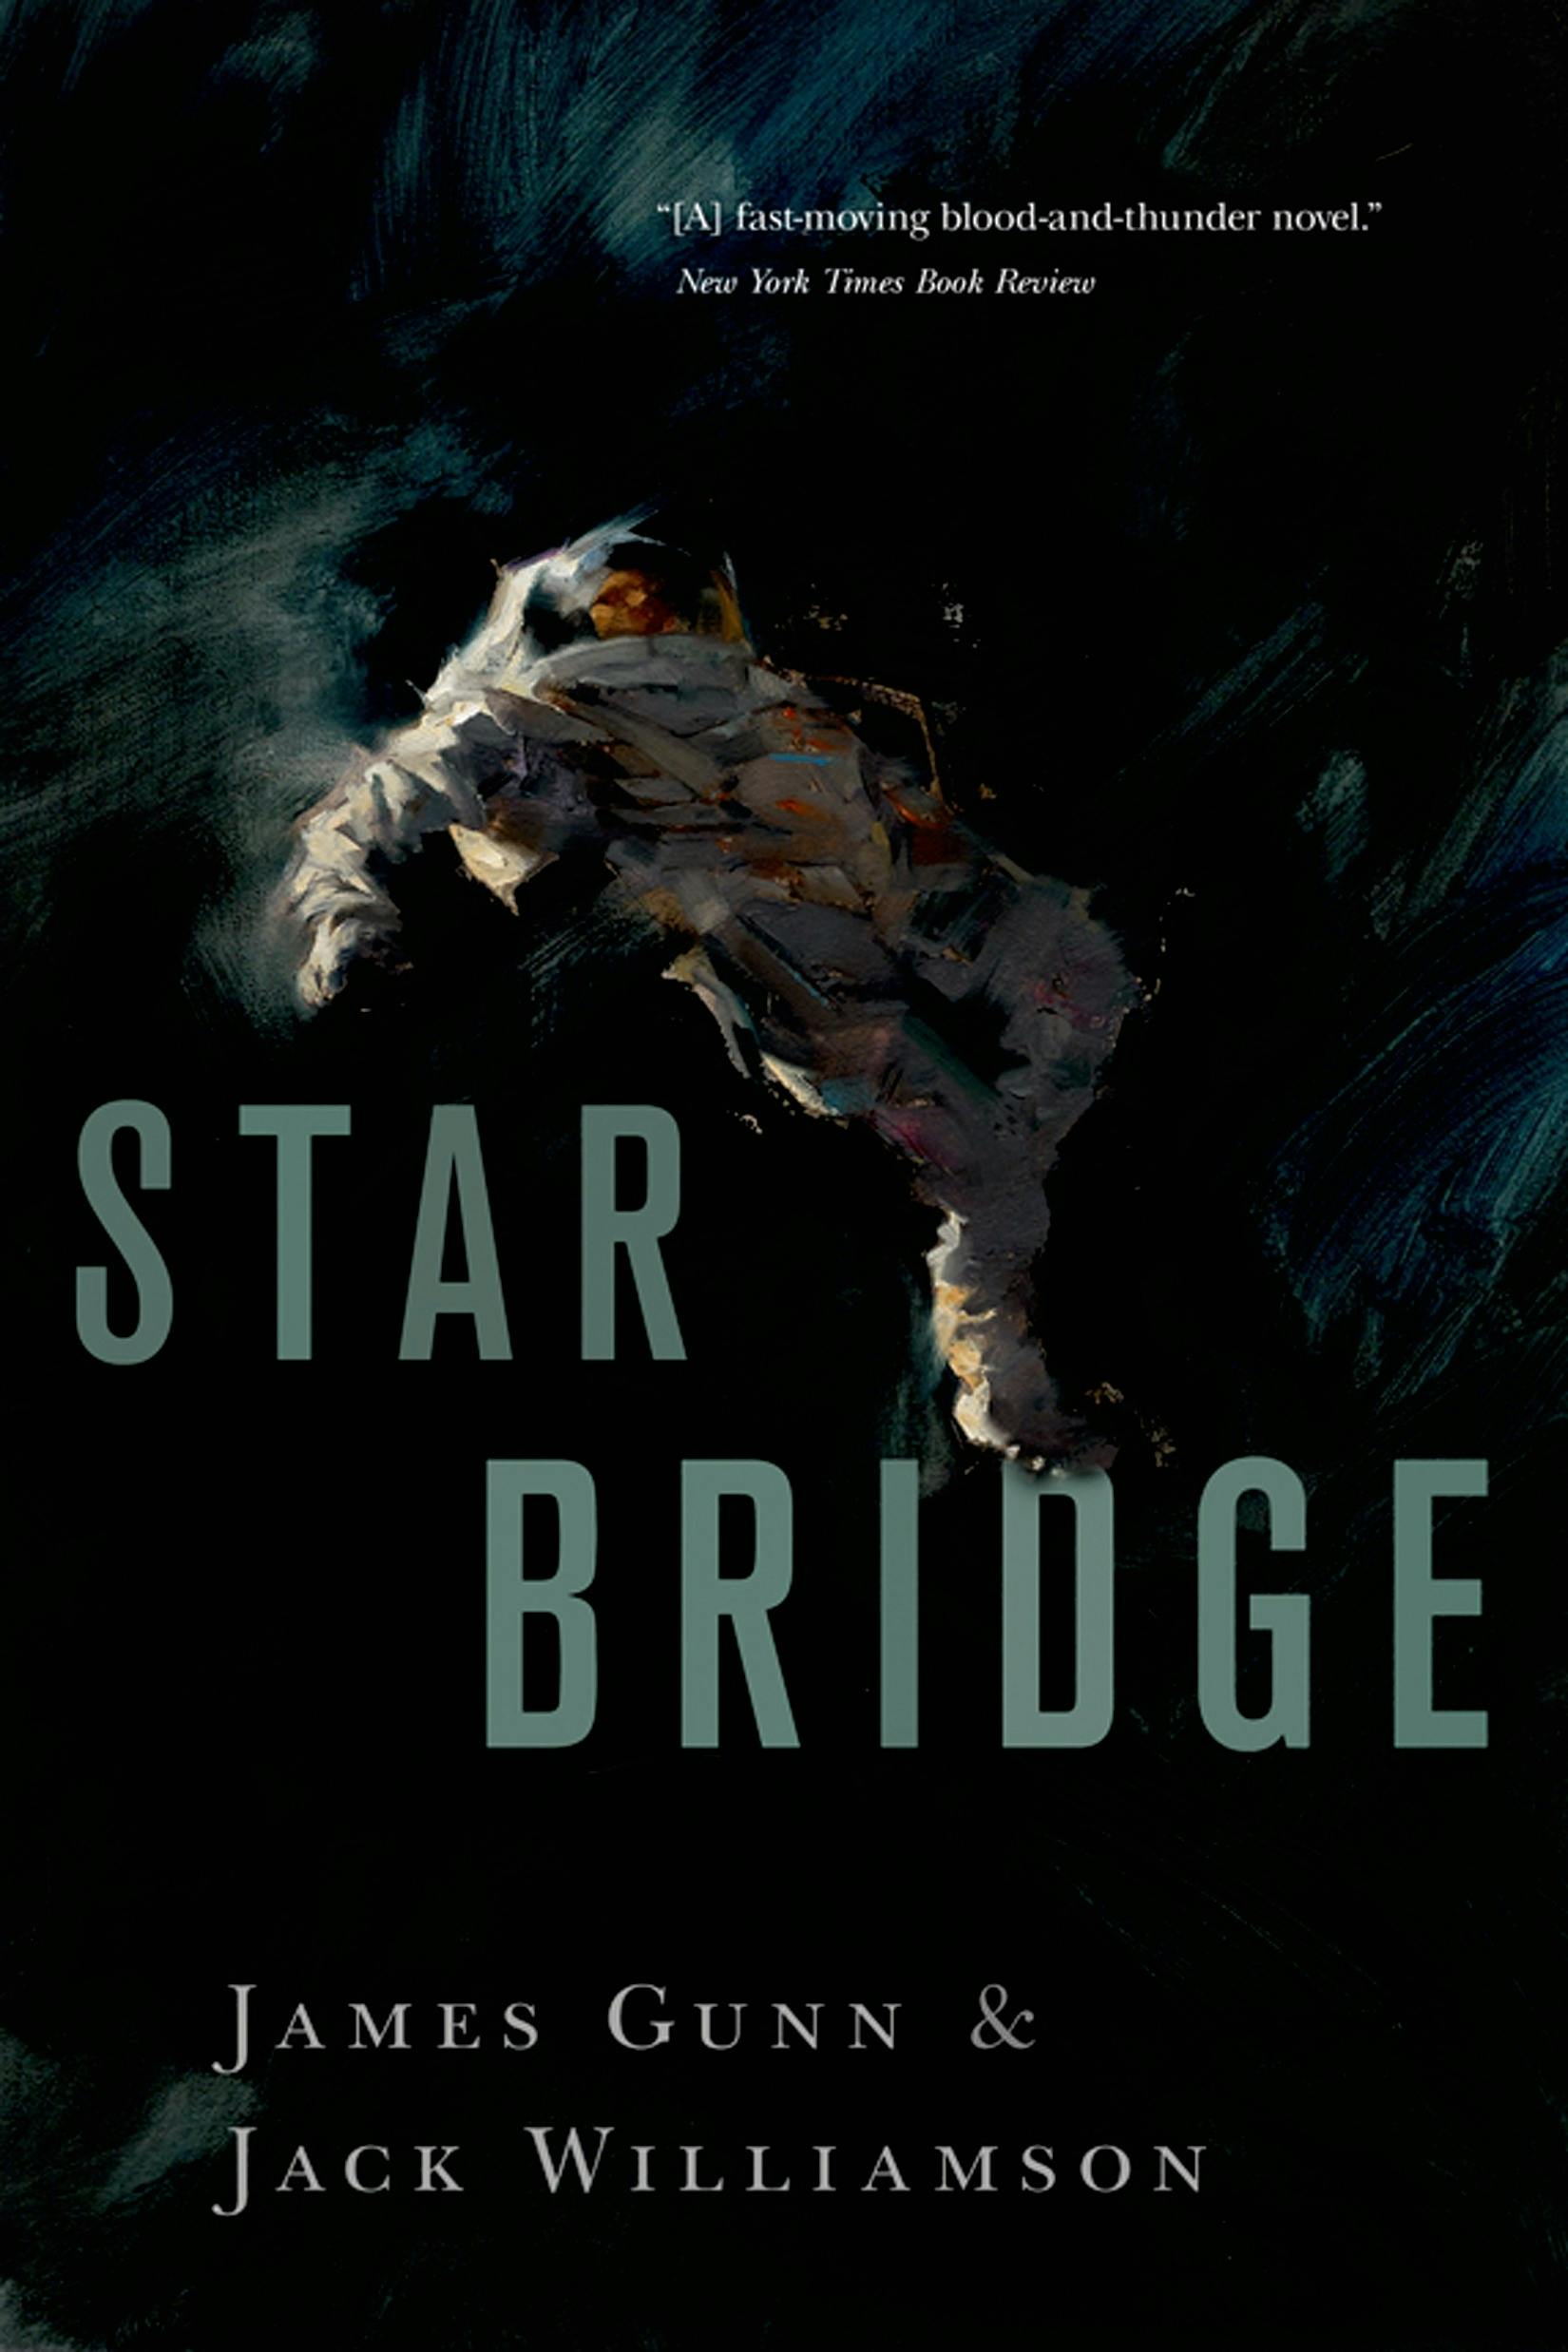 Cover for the book titled as: Star Bridge